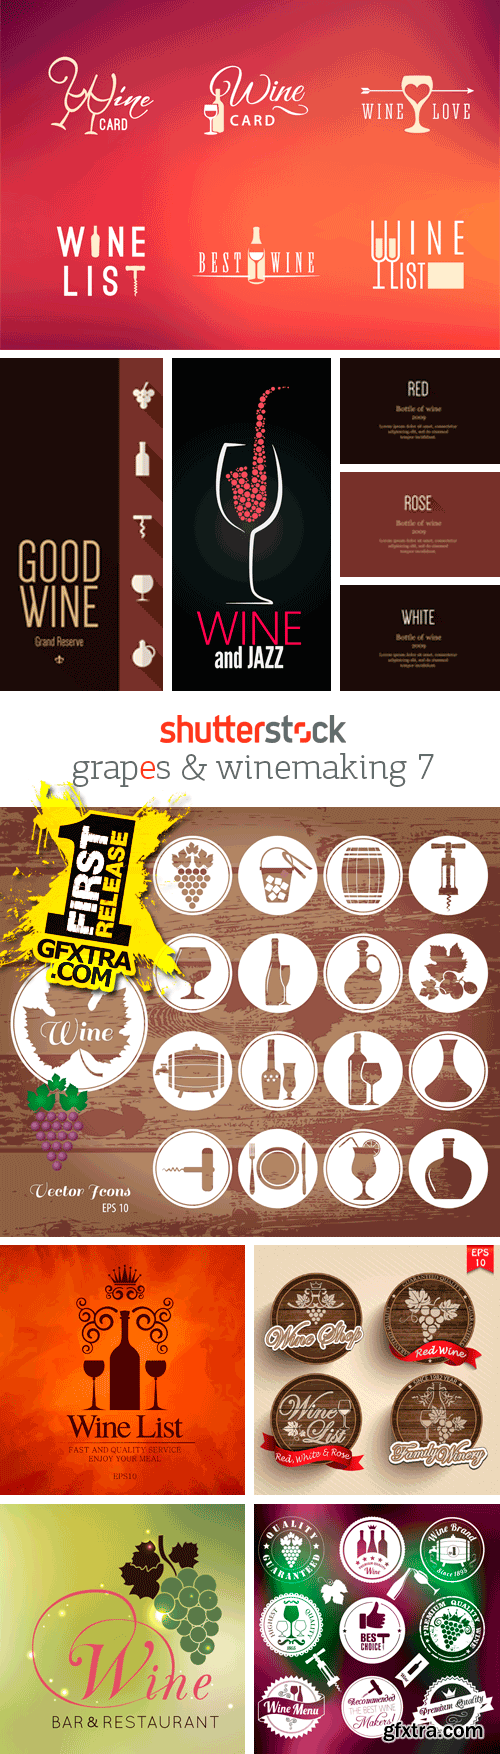 Grapes & Winemaking 7, 25xEPS